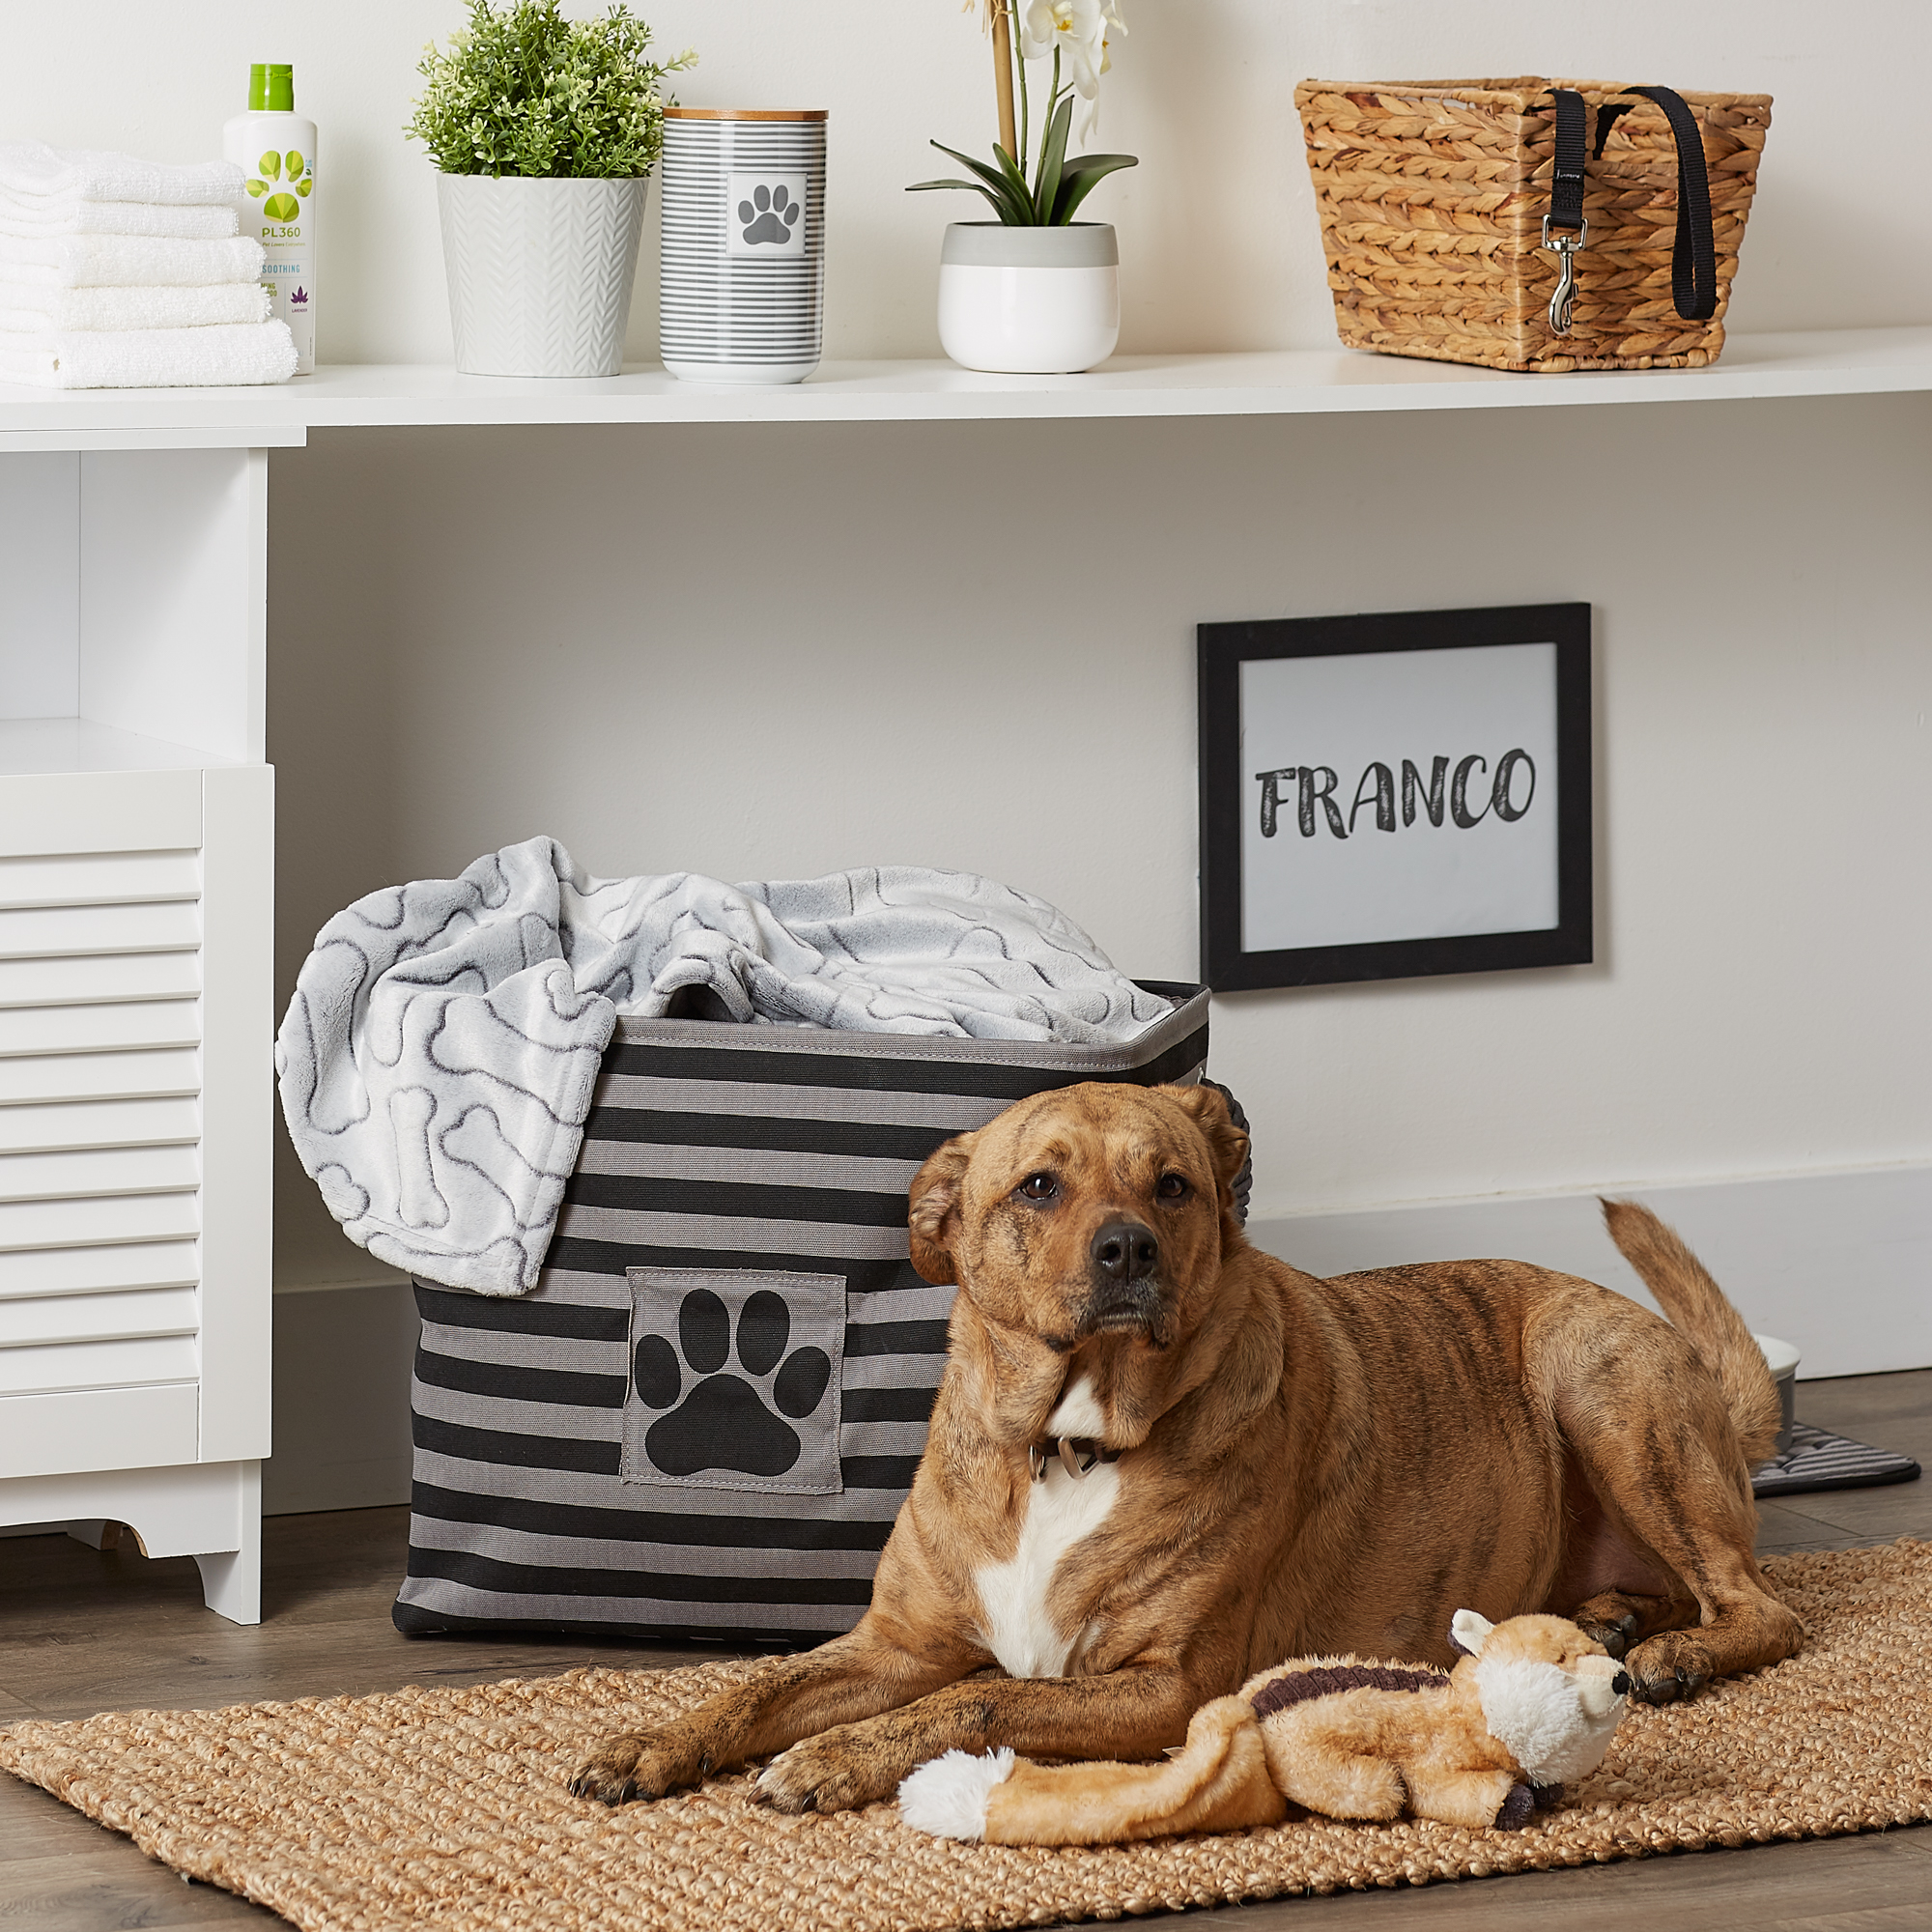 Bone Dry Polyester Pet Bin Stripe With Paw Patch Black Rectangle Large